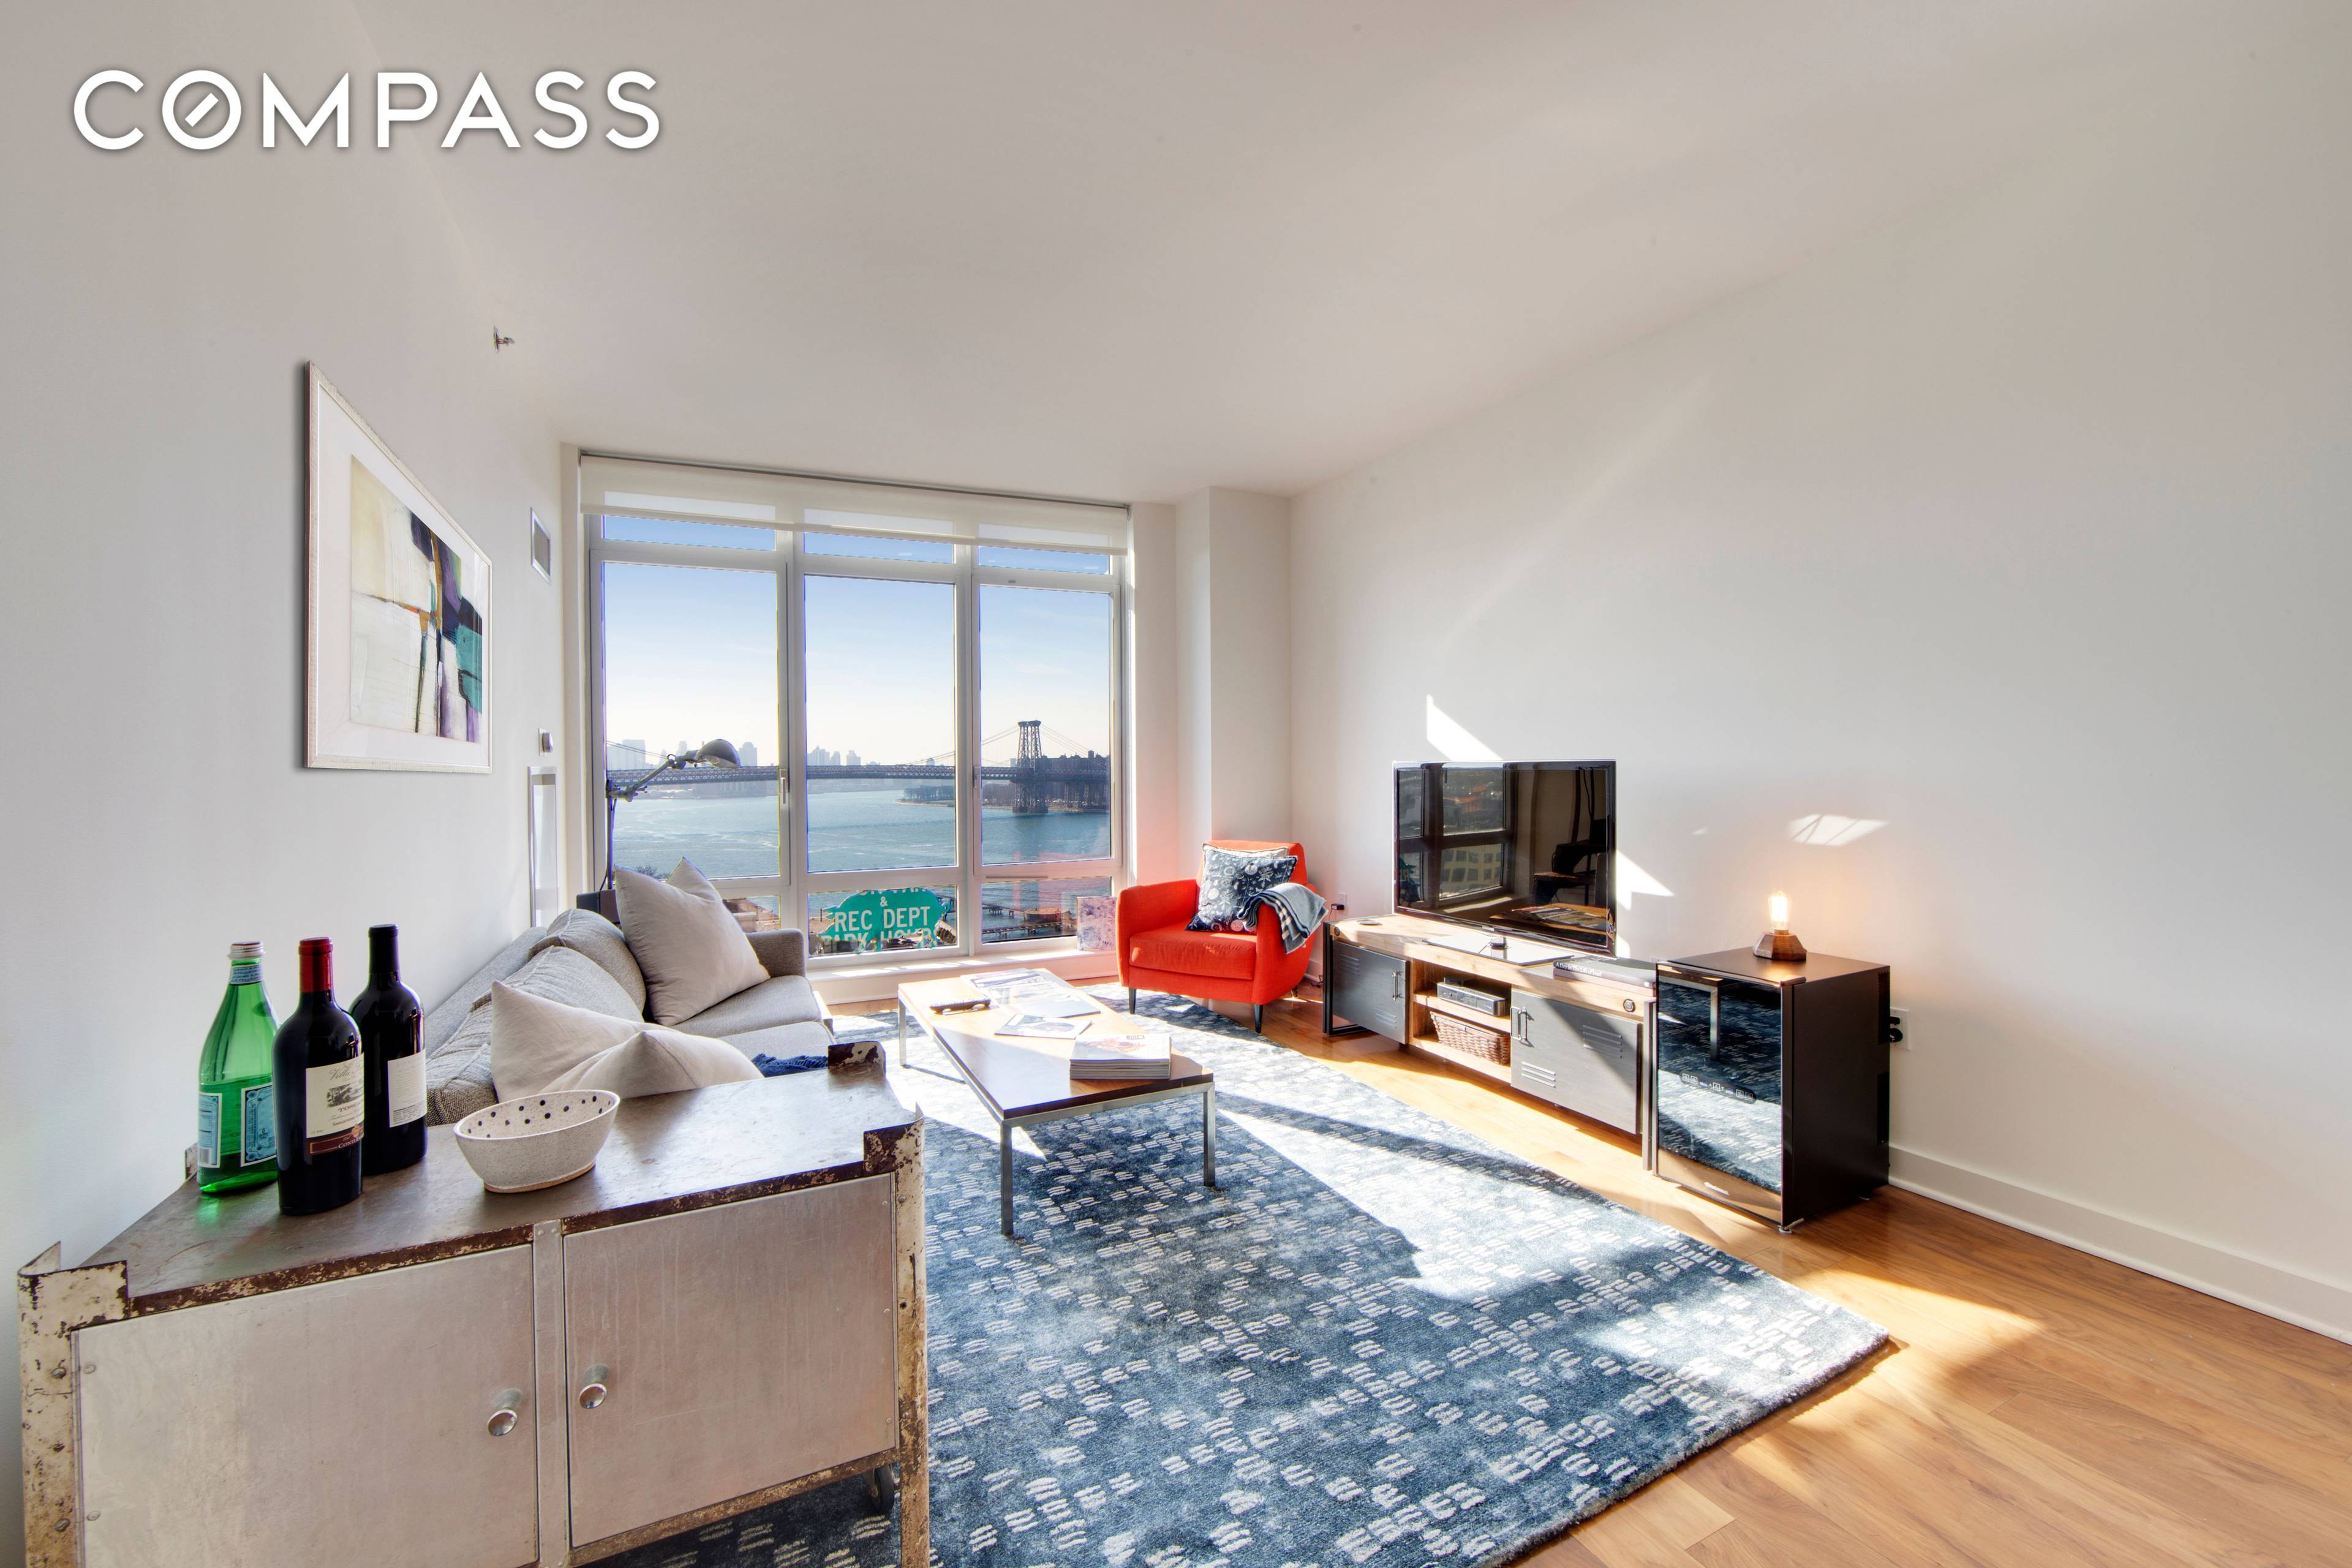 Apartment 19C is a 775sf 1 bedroom, 1 bath and offers open views of the East River and the Williamsburg Bridge.